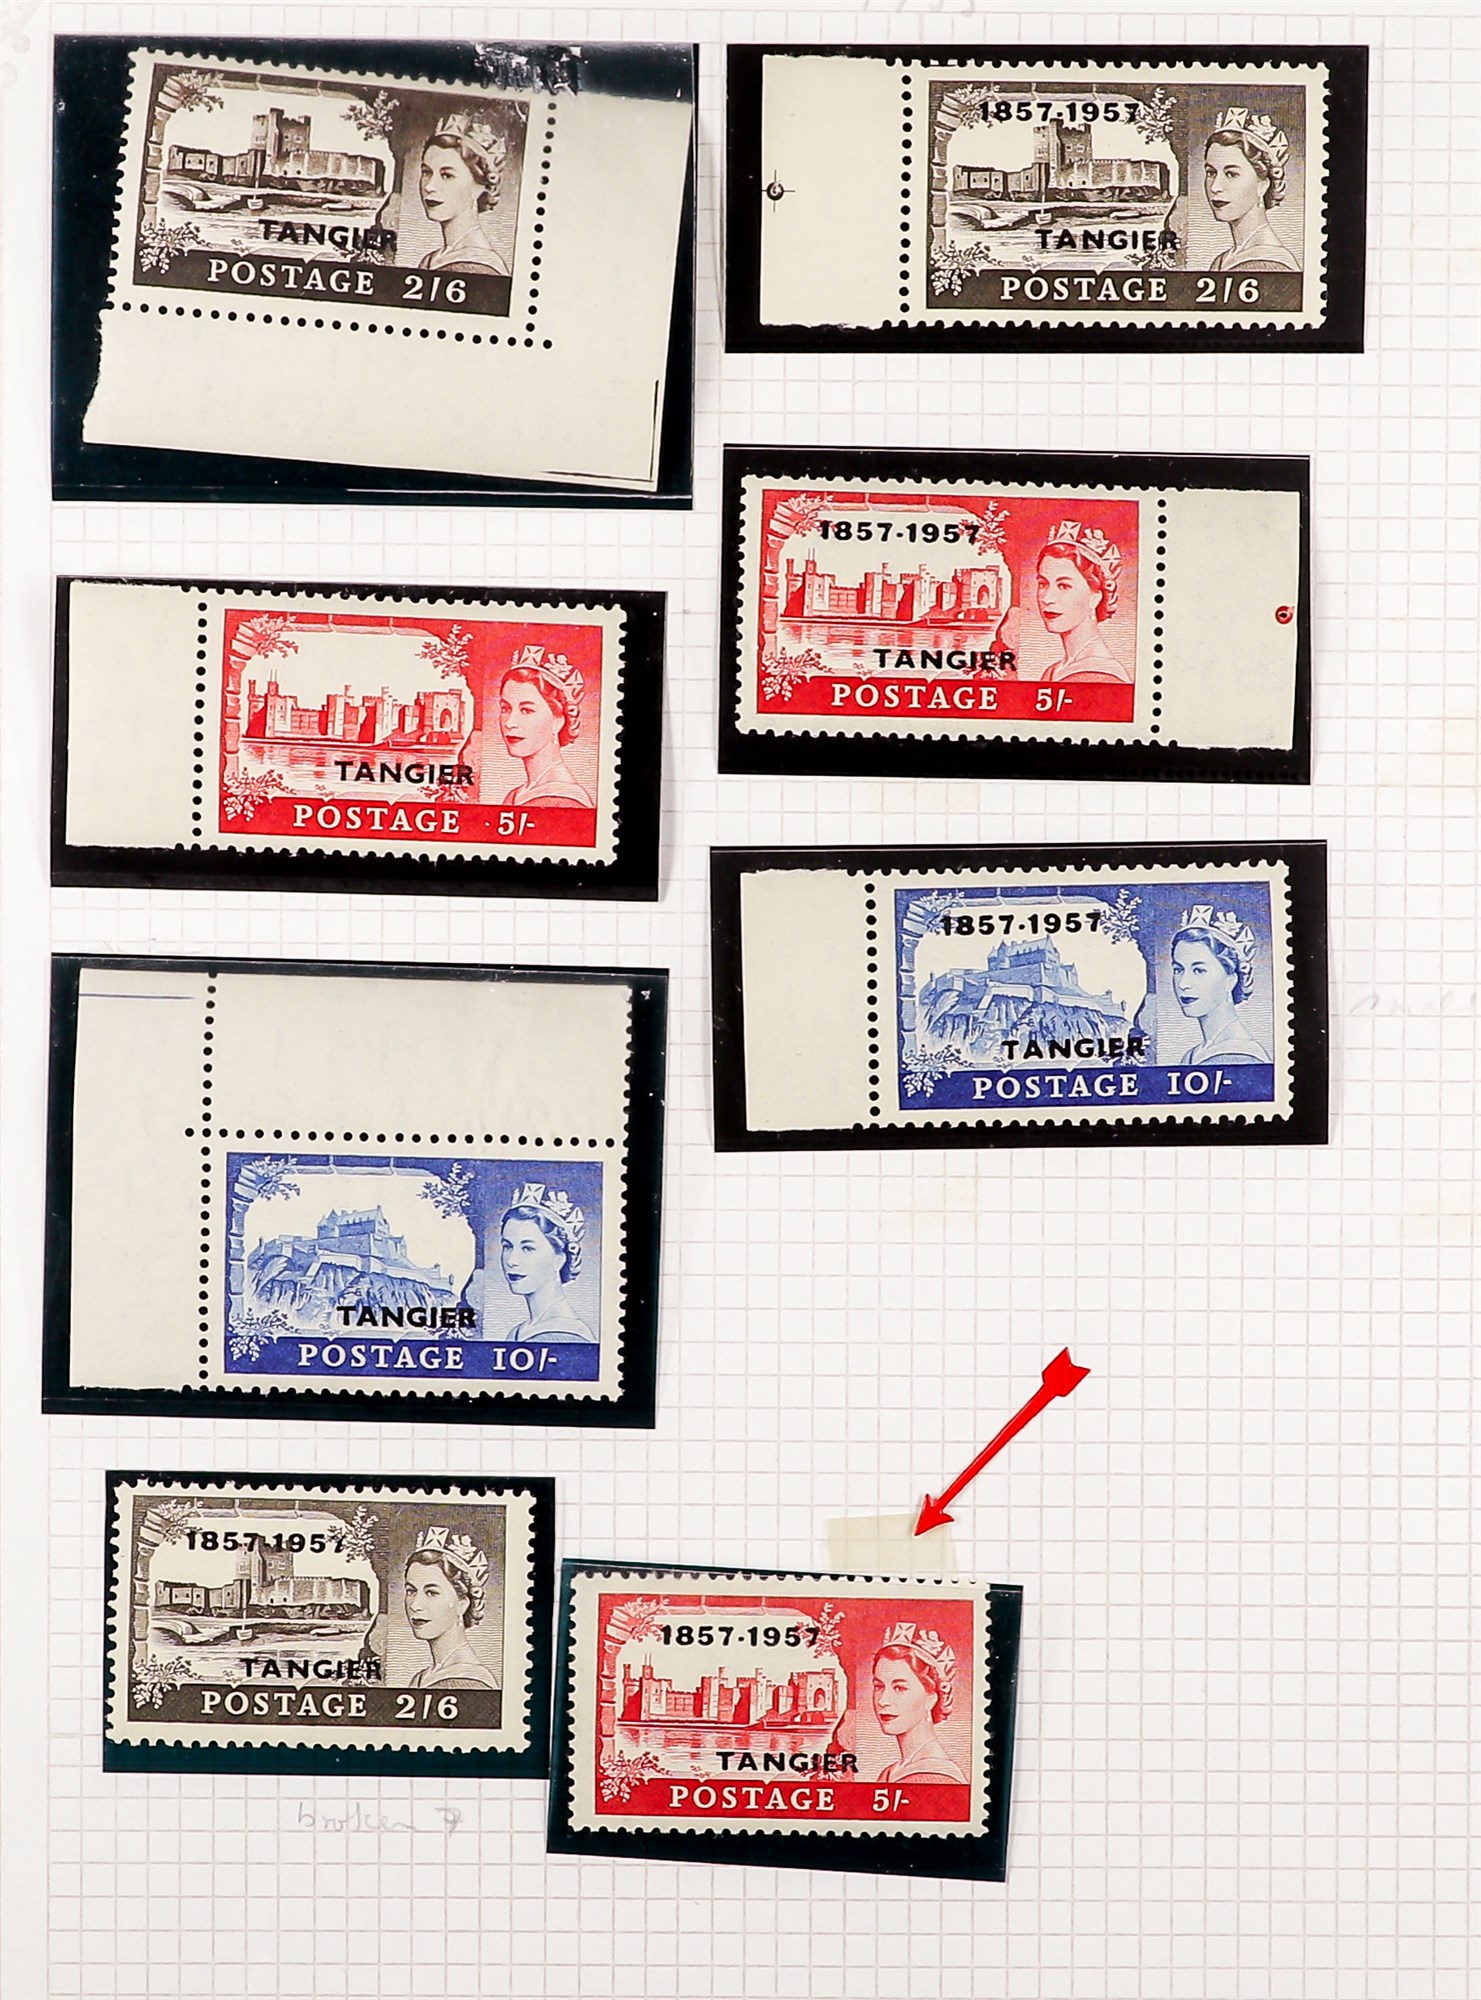 MOROCCO AGENCIES TANGIER 1927 - 1957 collection of mint and never hinged mint stamps, many sets, - Image 5 of 6